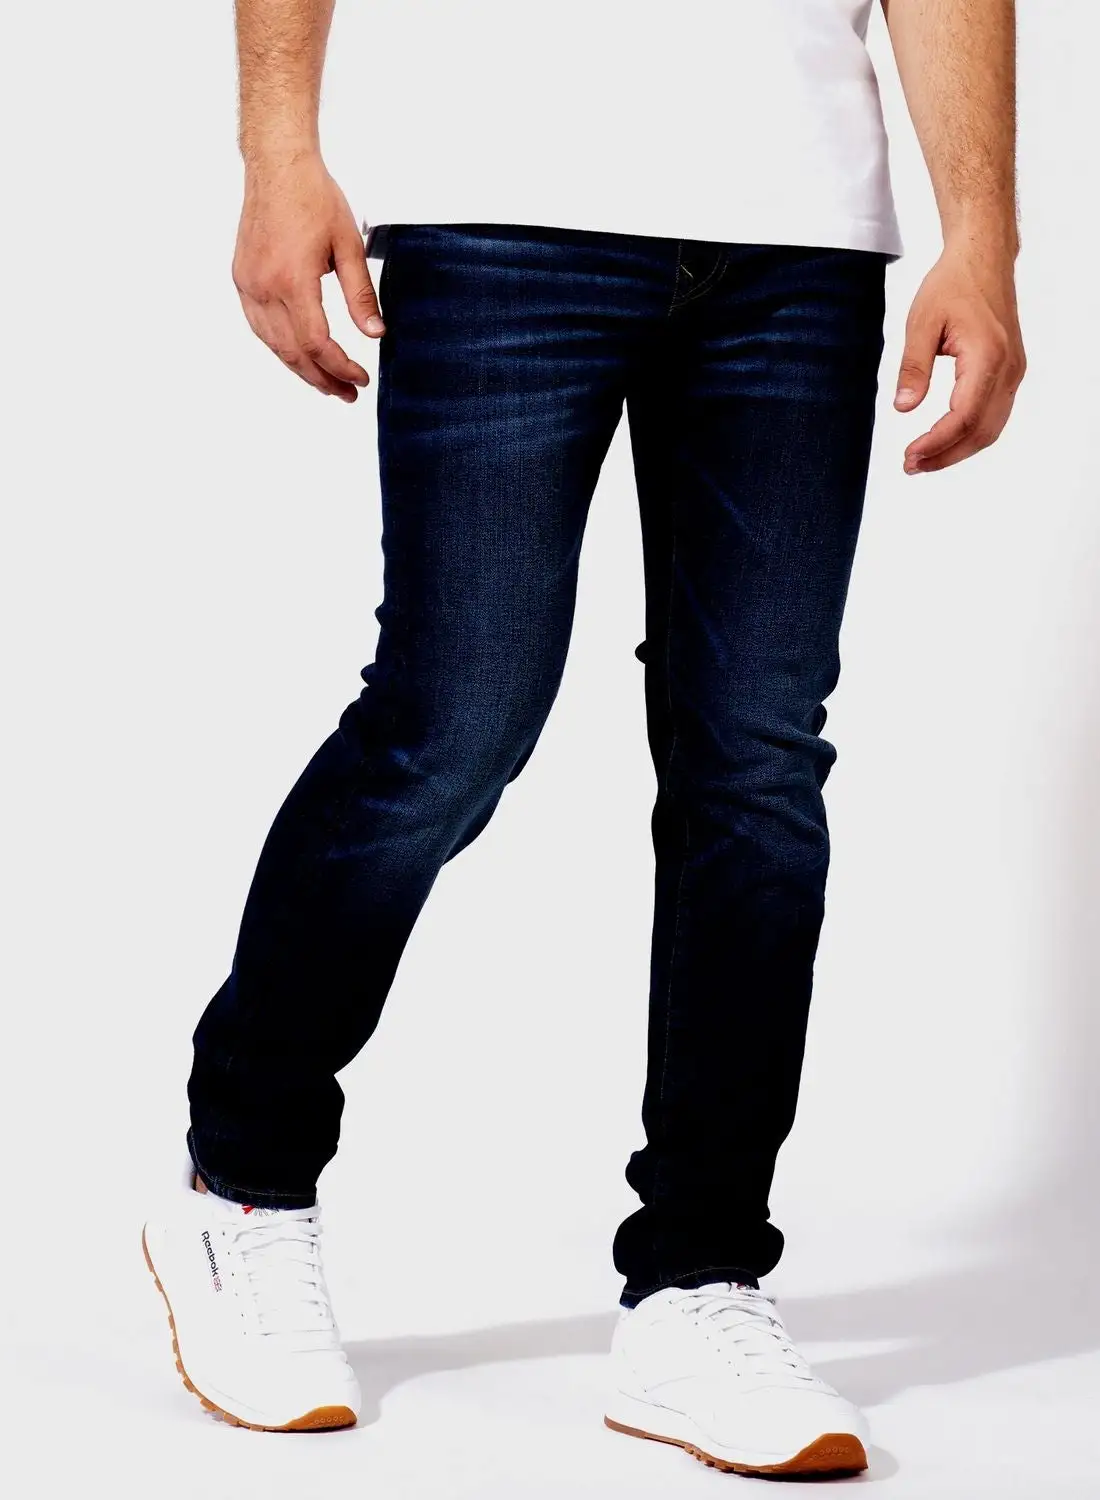 American Eagle Rinse Wash Slim Fit Jeans